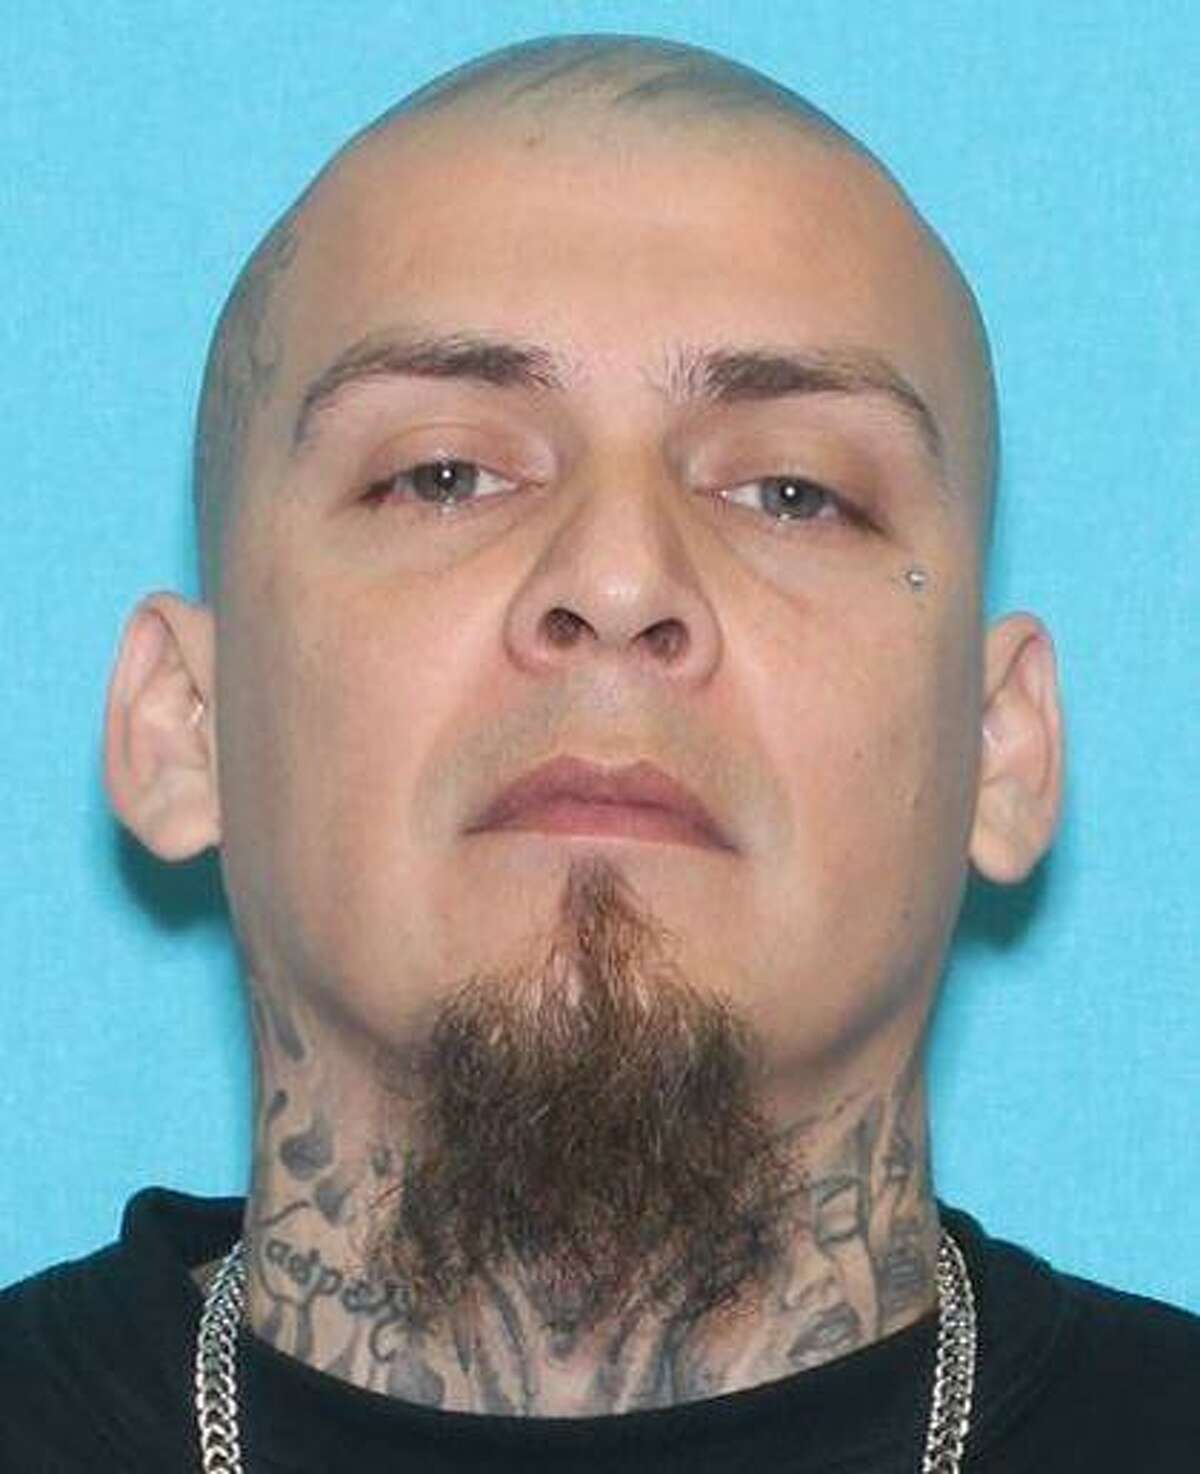 Crime Stoppers will pay up to $5,000 for information leading to the arrest of Faustino Vasquez.